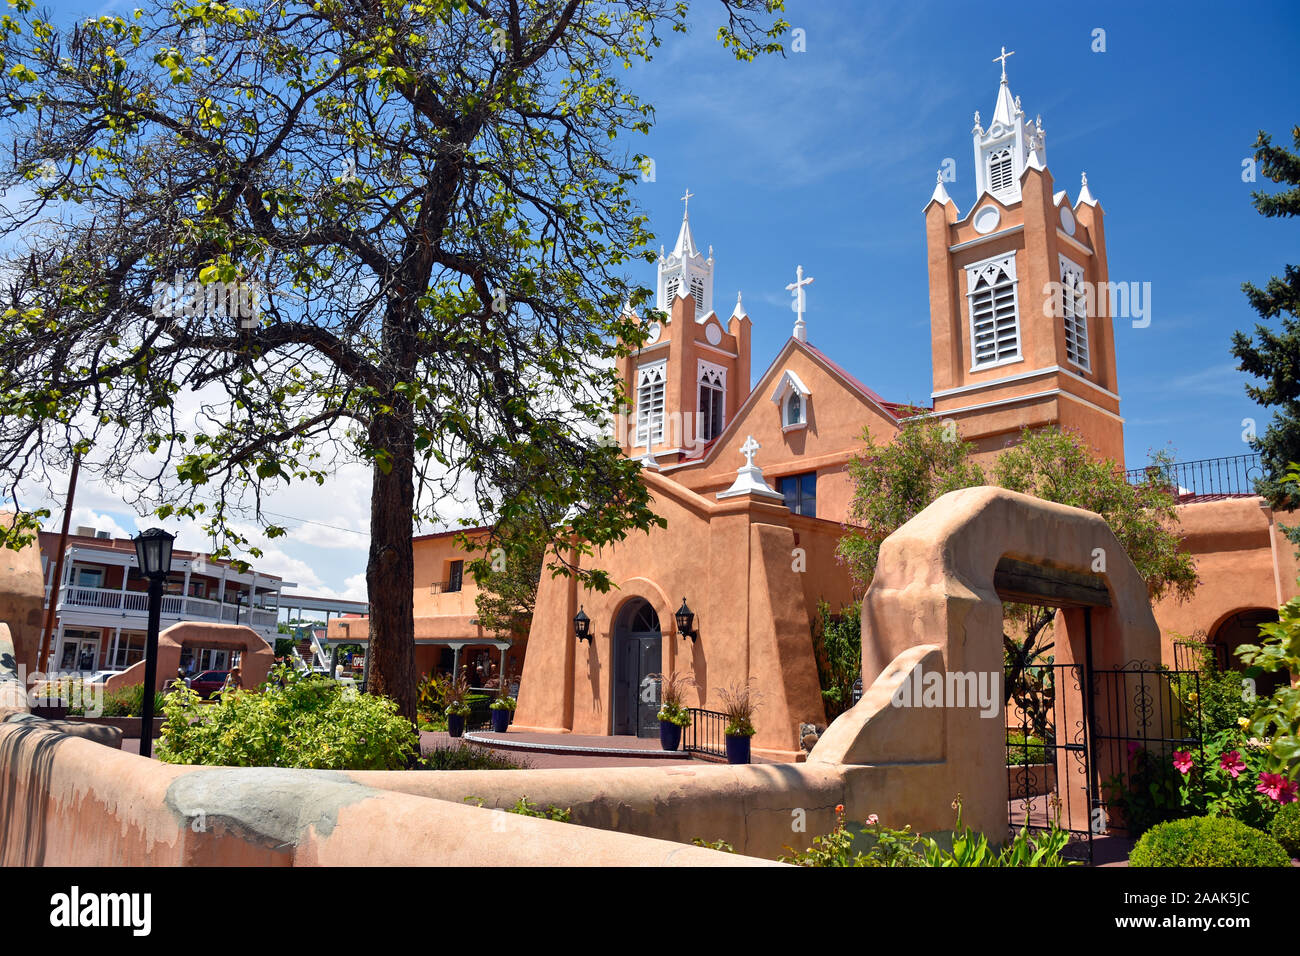 San Felipe De Neri Church, built in 1793 and the only building in Old Town Albuquerque New Mexico that dates back to the Spanish colonial period. Stock Photo